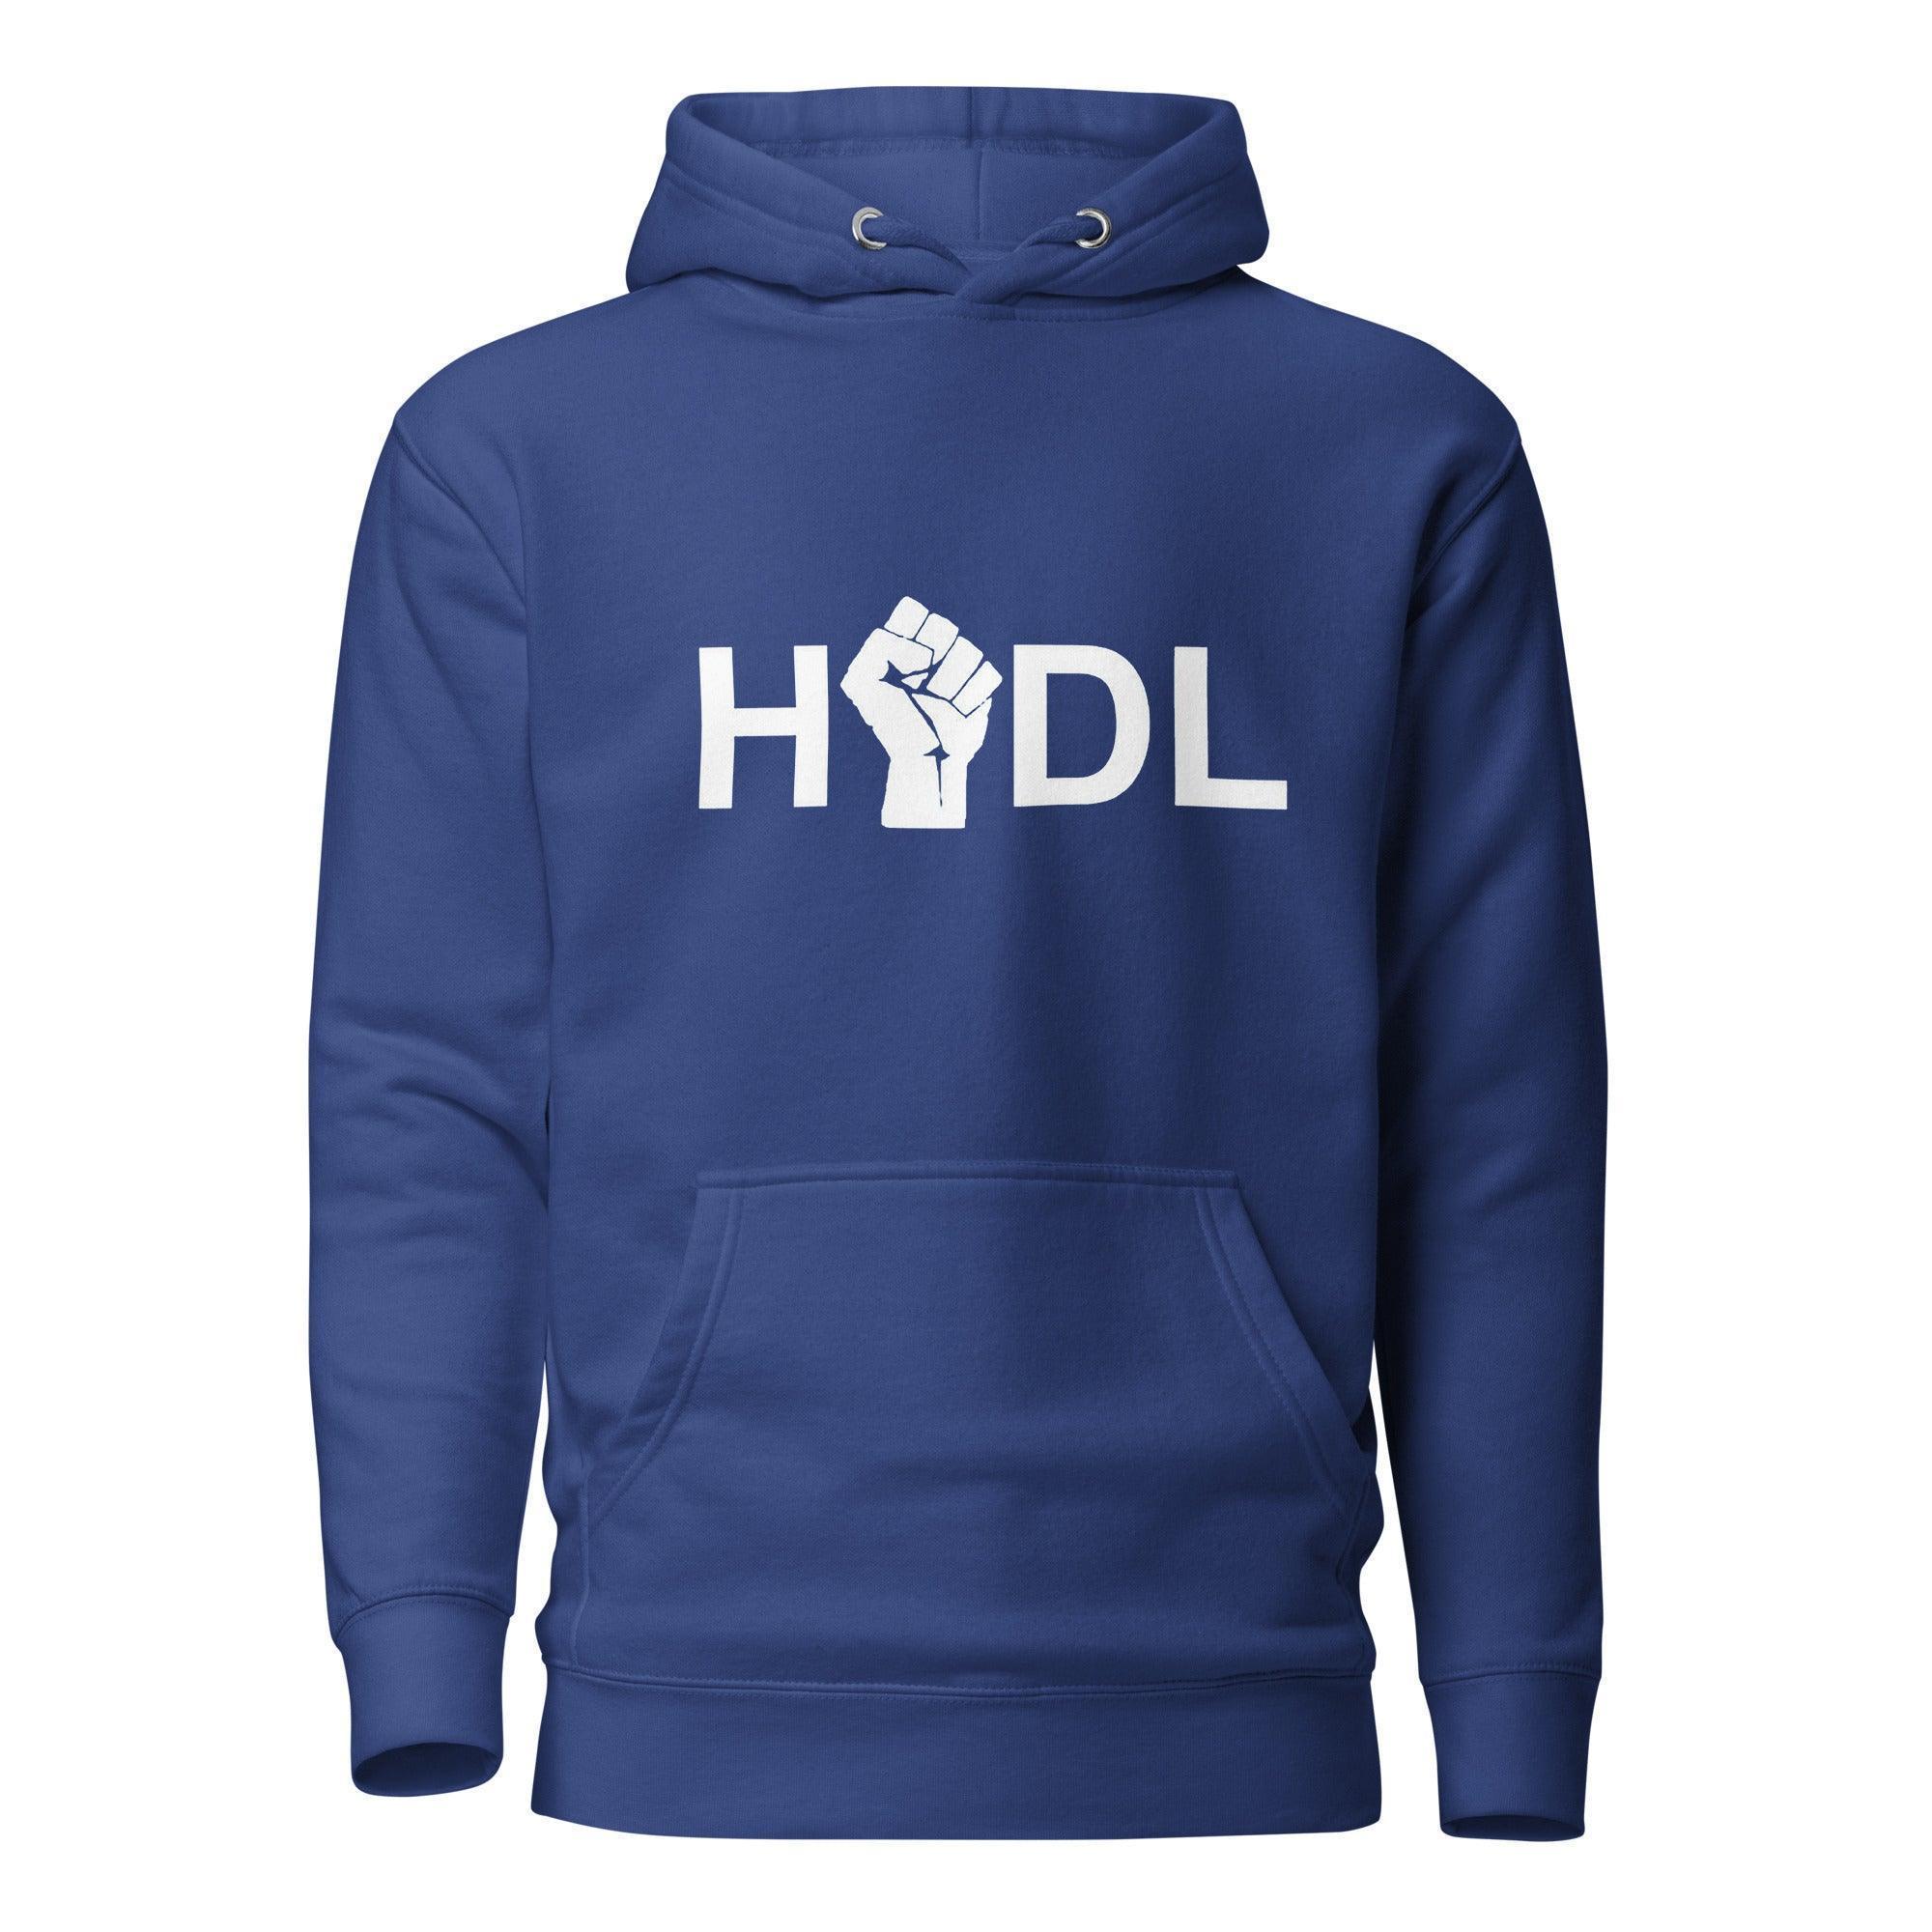 HODL Strong Pullover Hoodie - InvestmenTees